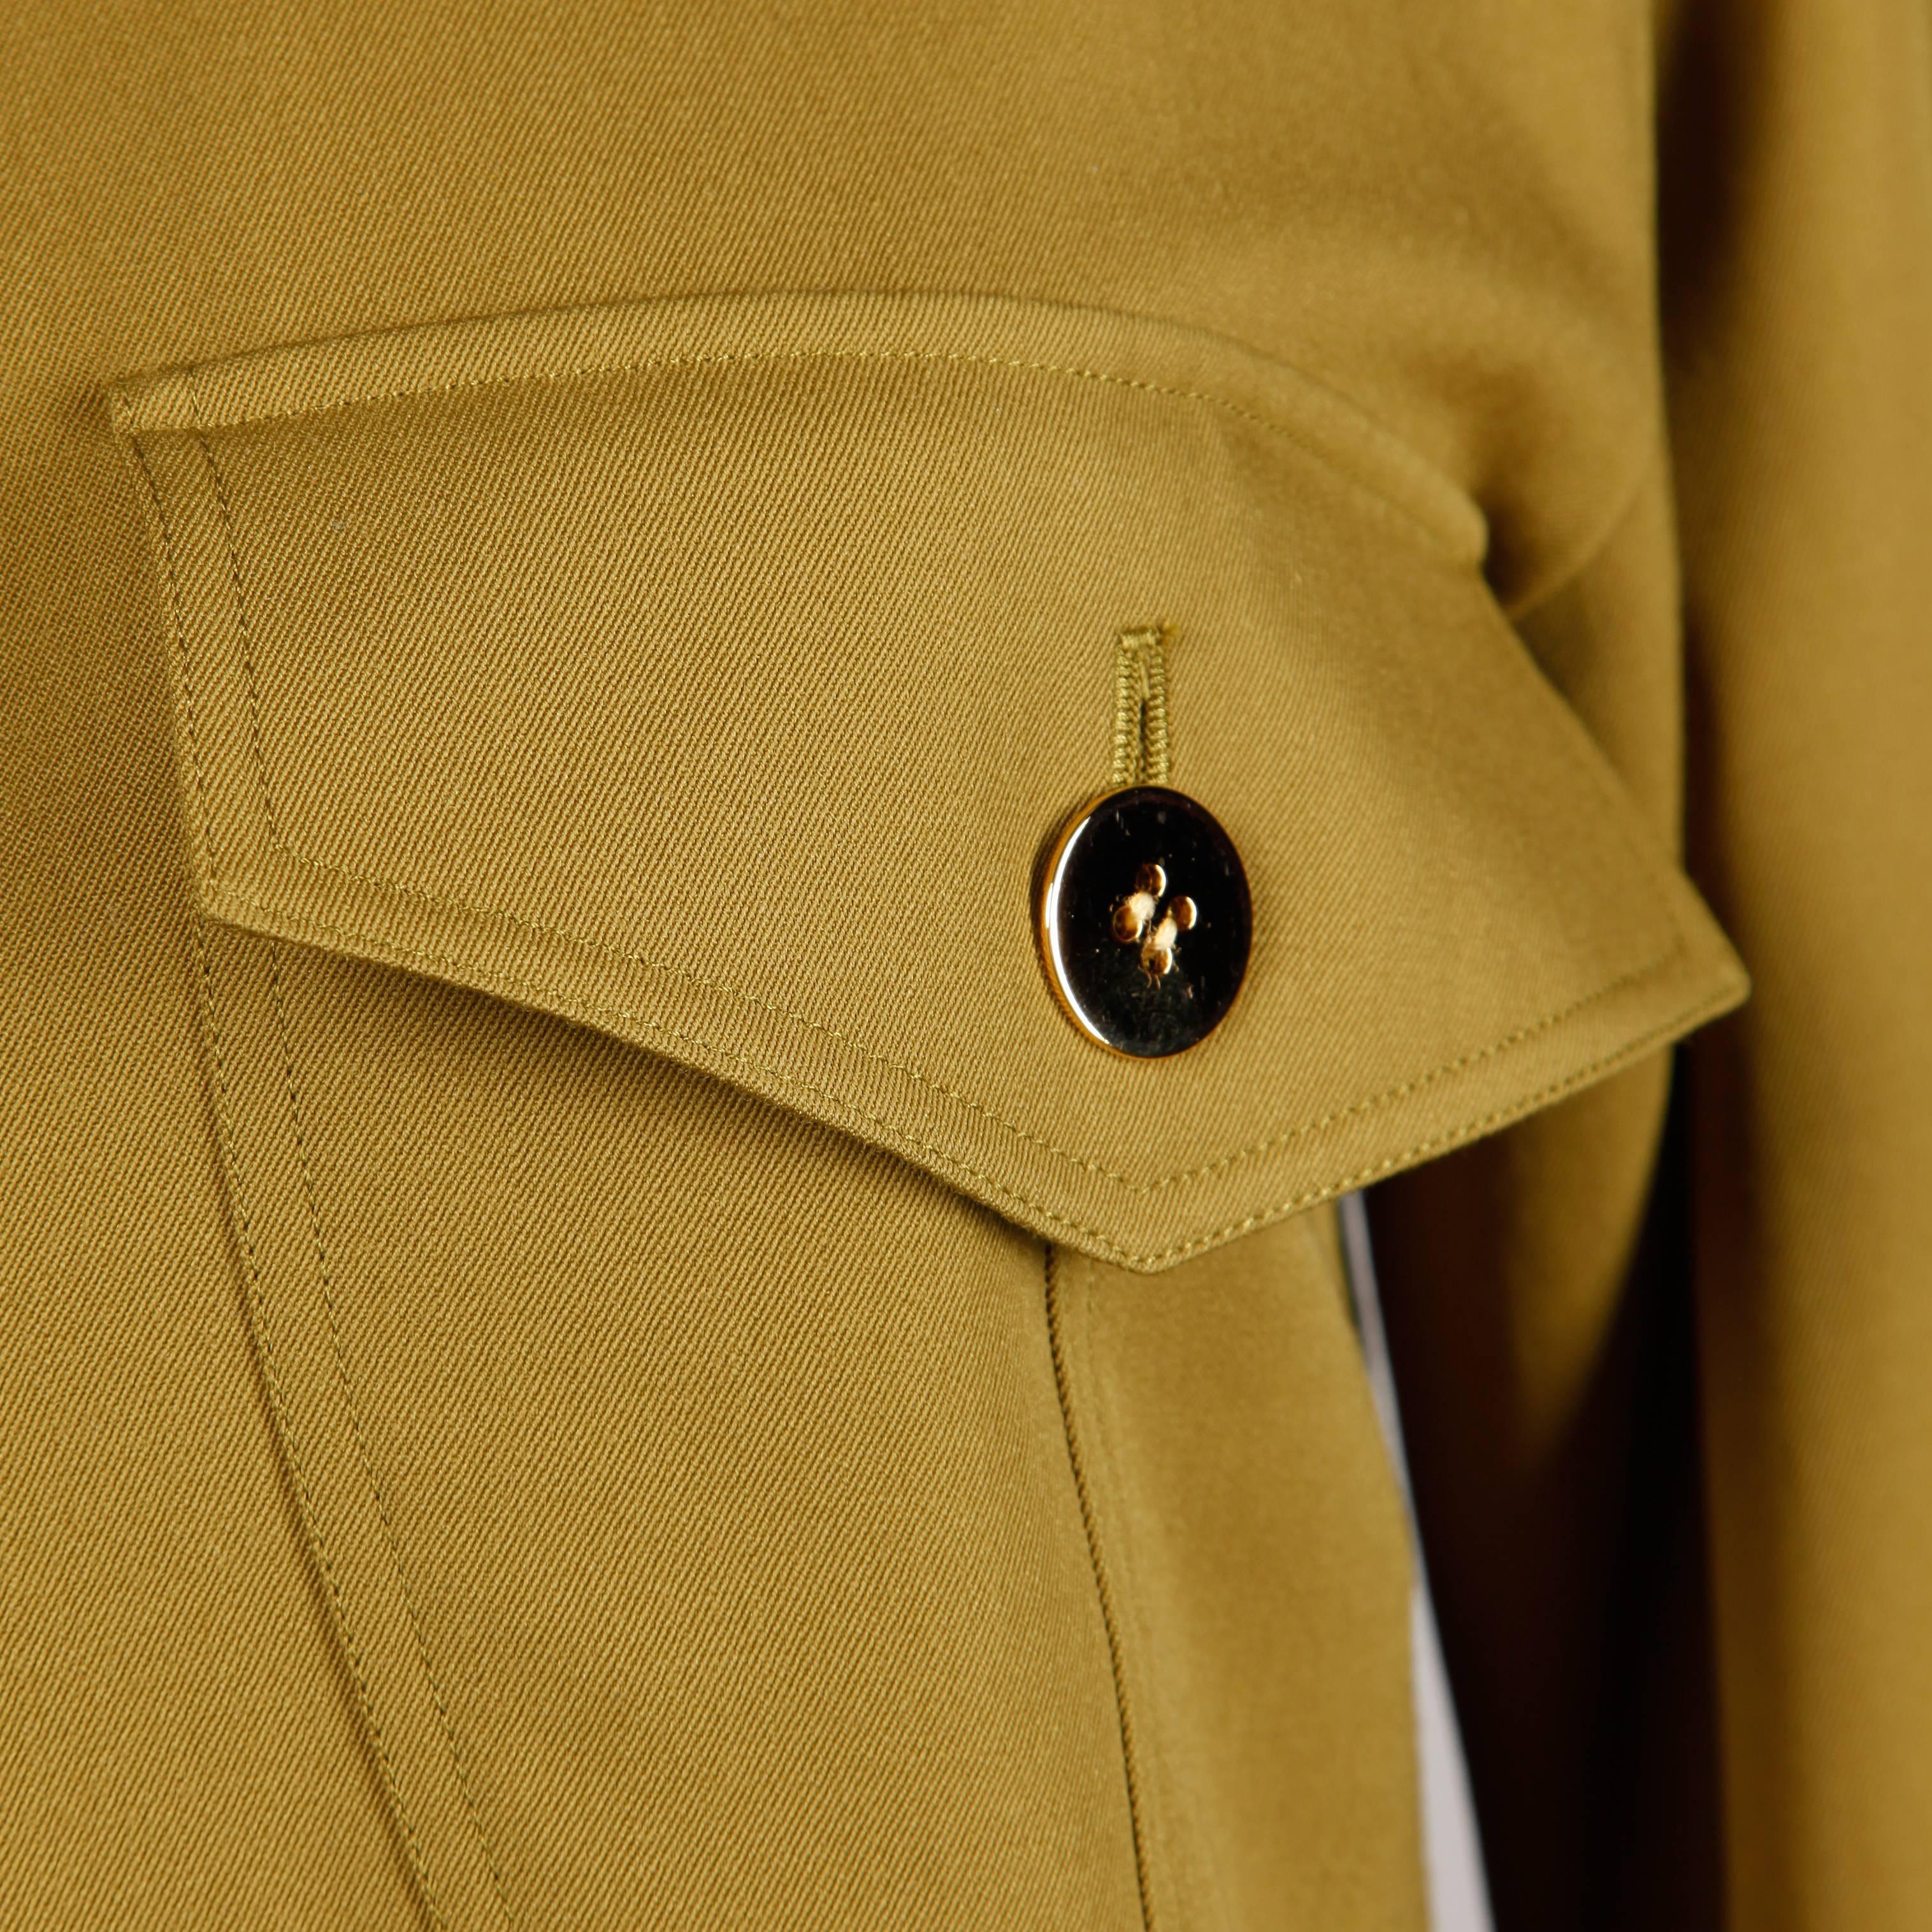 Simple and chic olive green wool shirt dress by Genny. Designed by Gianni Versace. Shiny heavy brass buttons and beautiful construction.

Detail: 

Unlined
Pockets: 2 Front Square Pockets
Closure: Button Front (4)
No Marked Size
Estimated